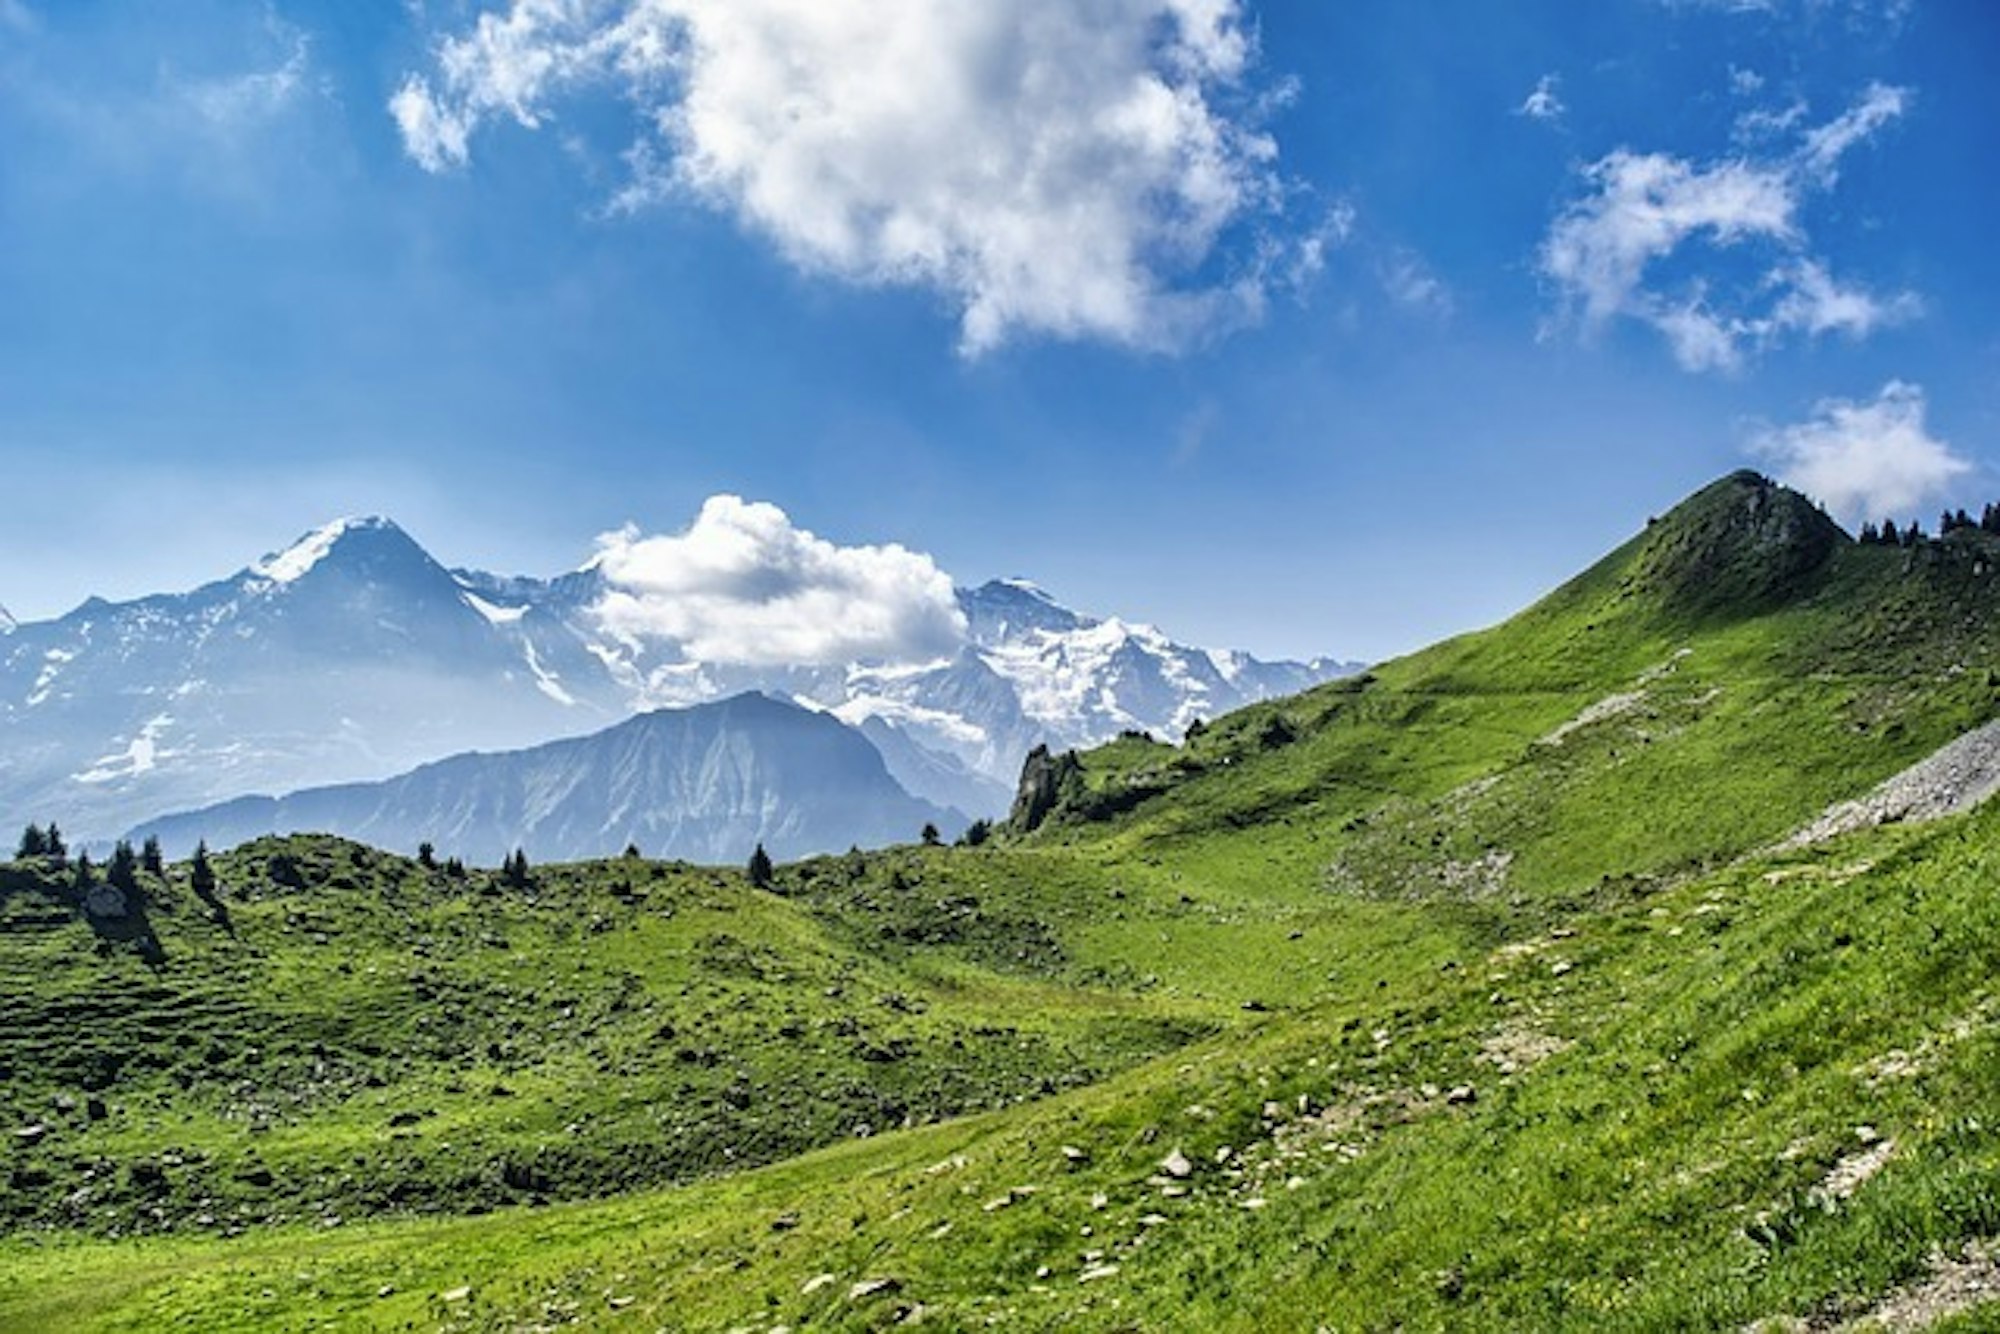 WHAT TO DO IN THE SWISS ALPS THIS SPRING